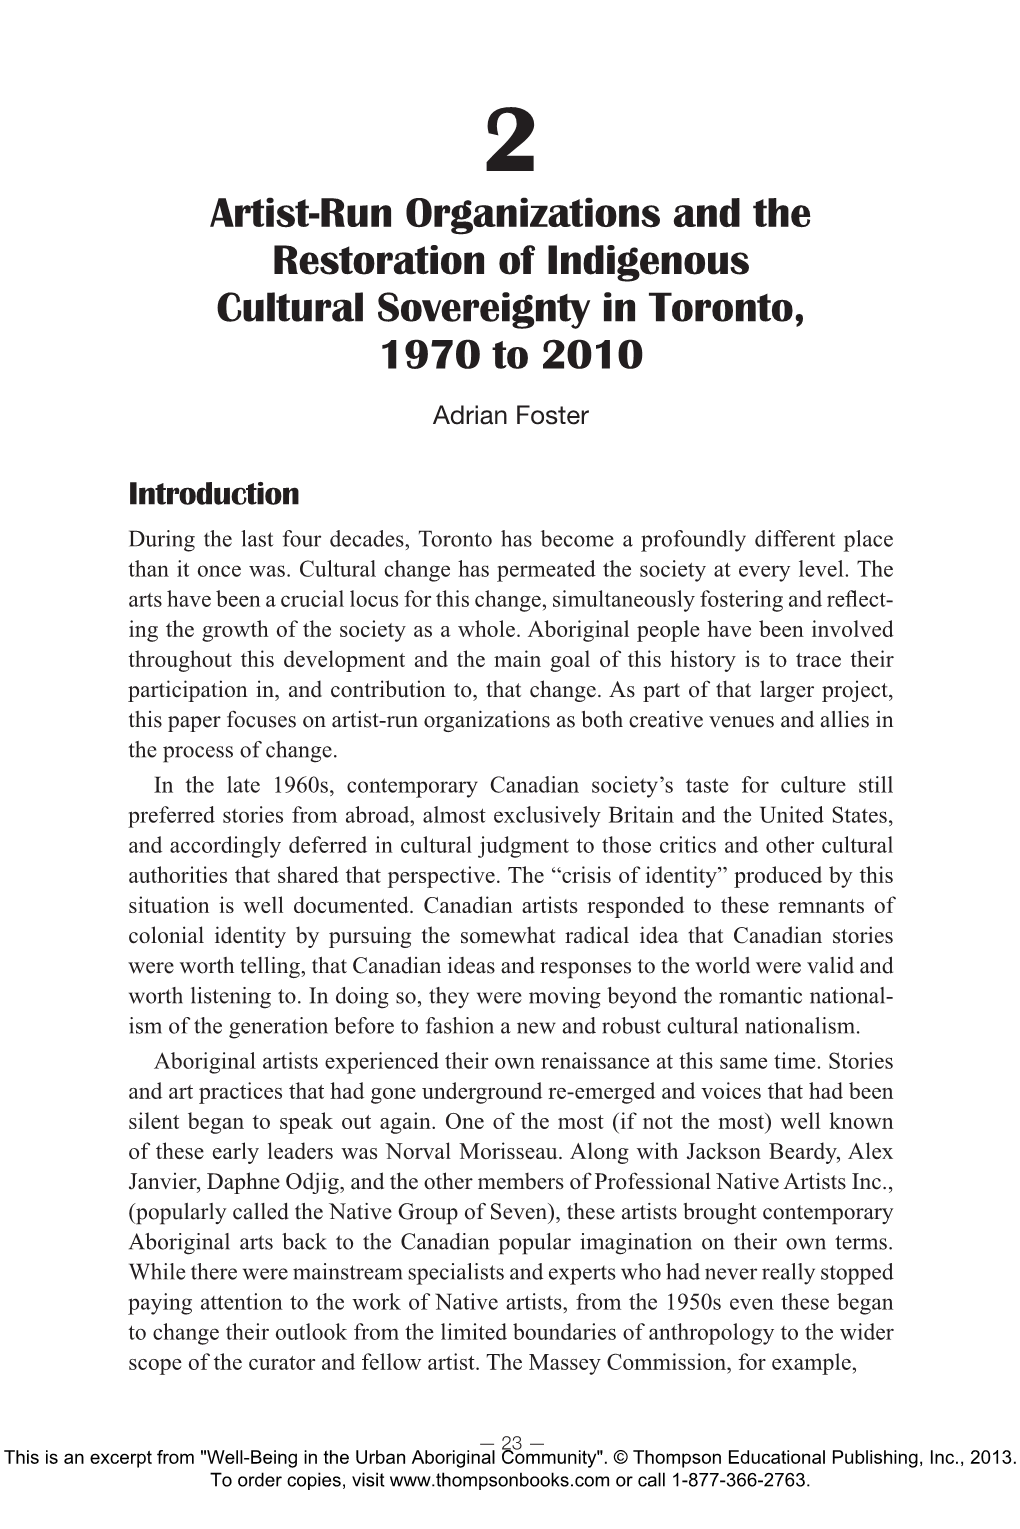 2. Artist-Run Organizations and the Restoration of Indigenous Cultural